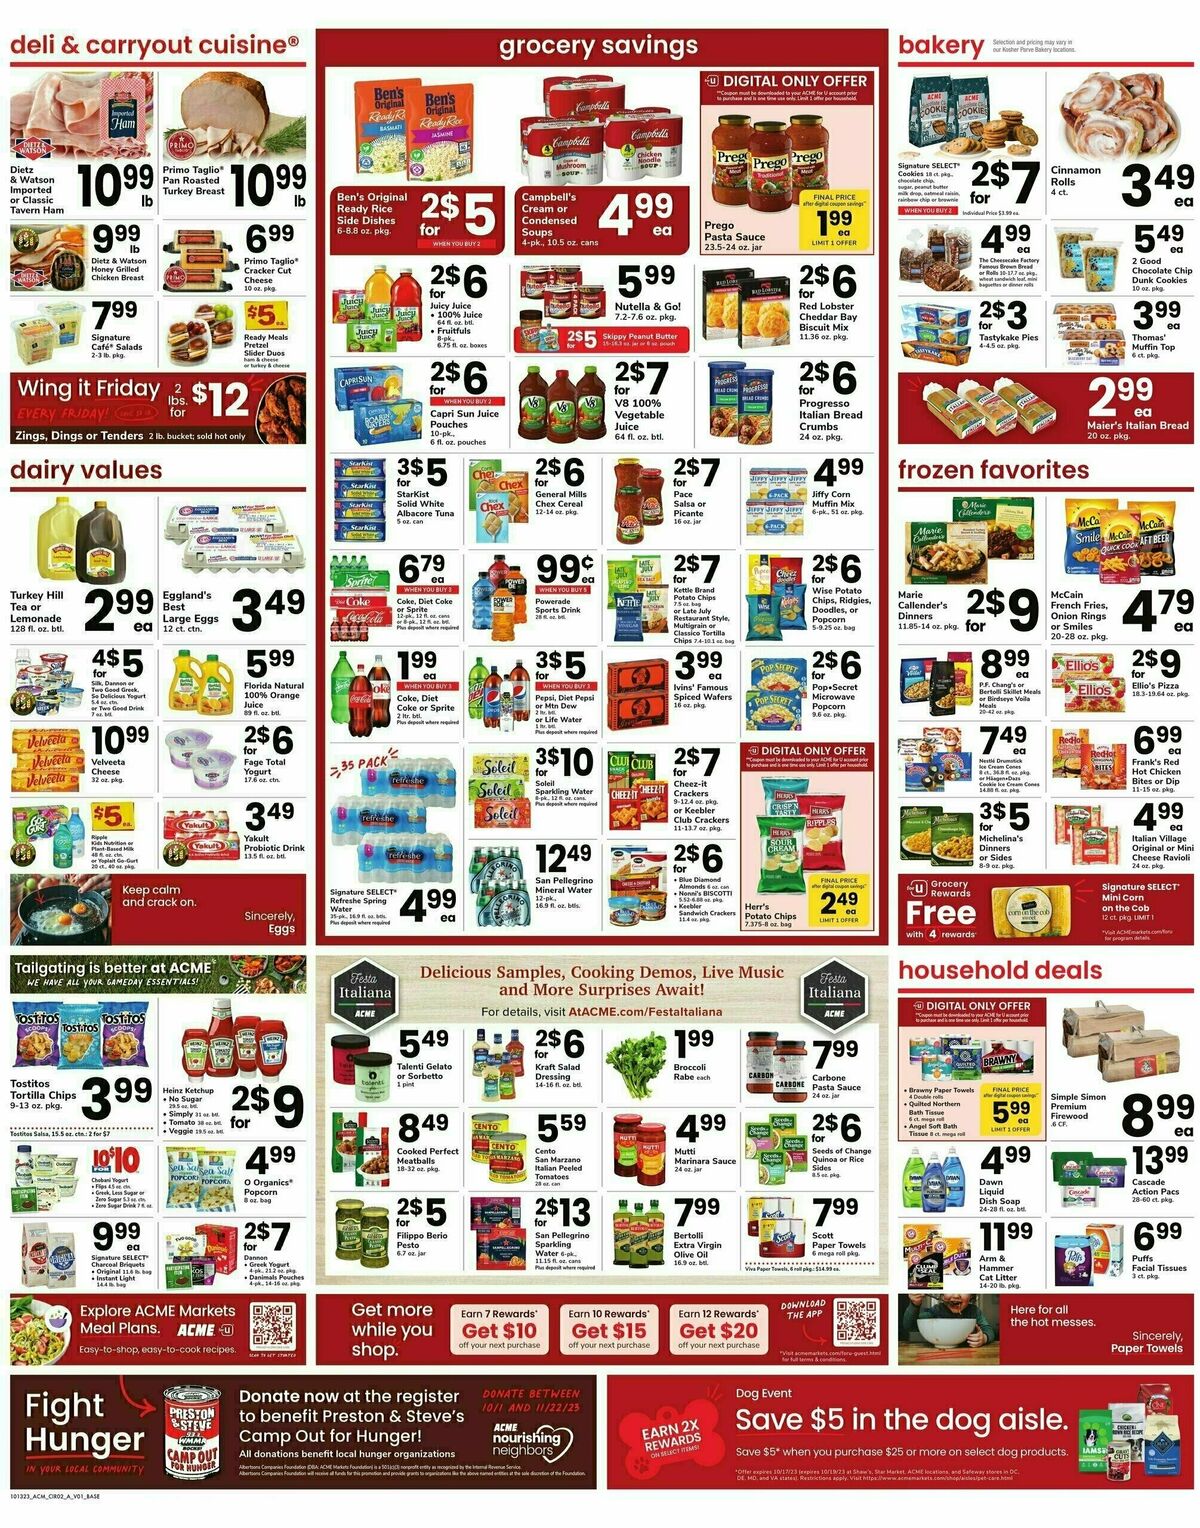 ACME Markets Weekly Ad from October 13